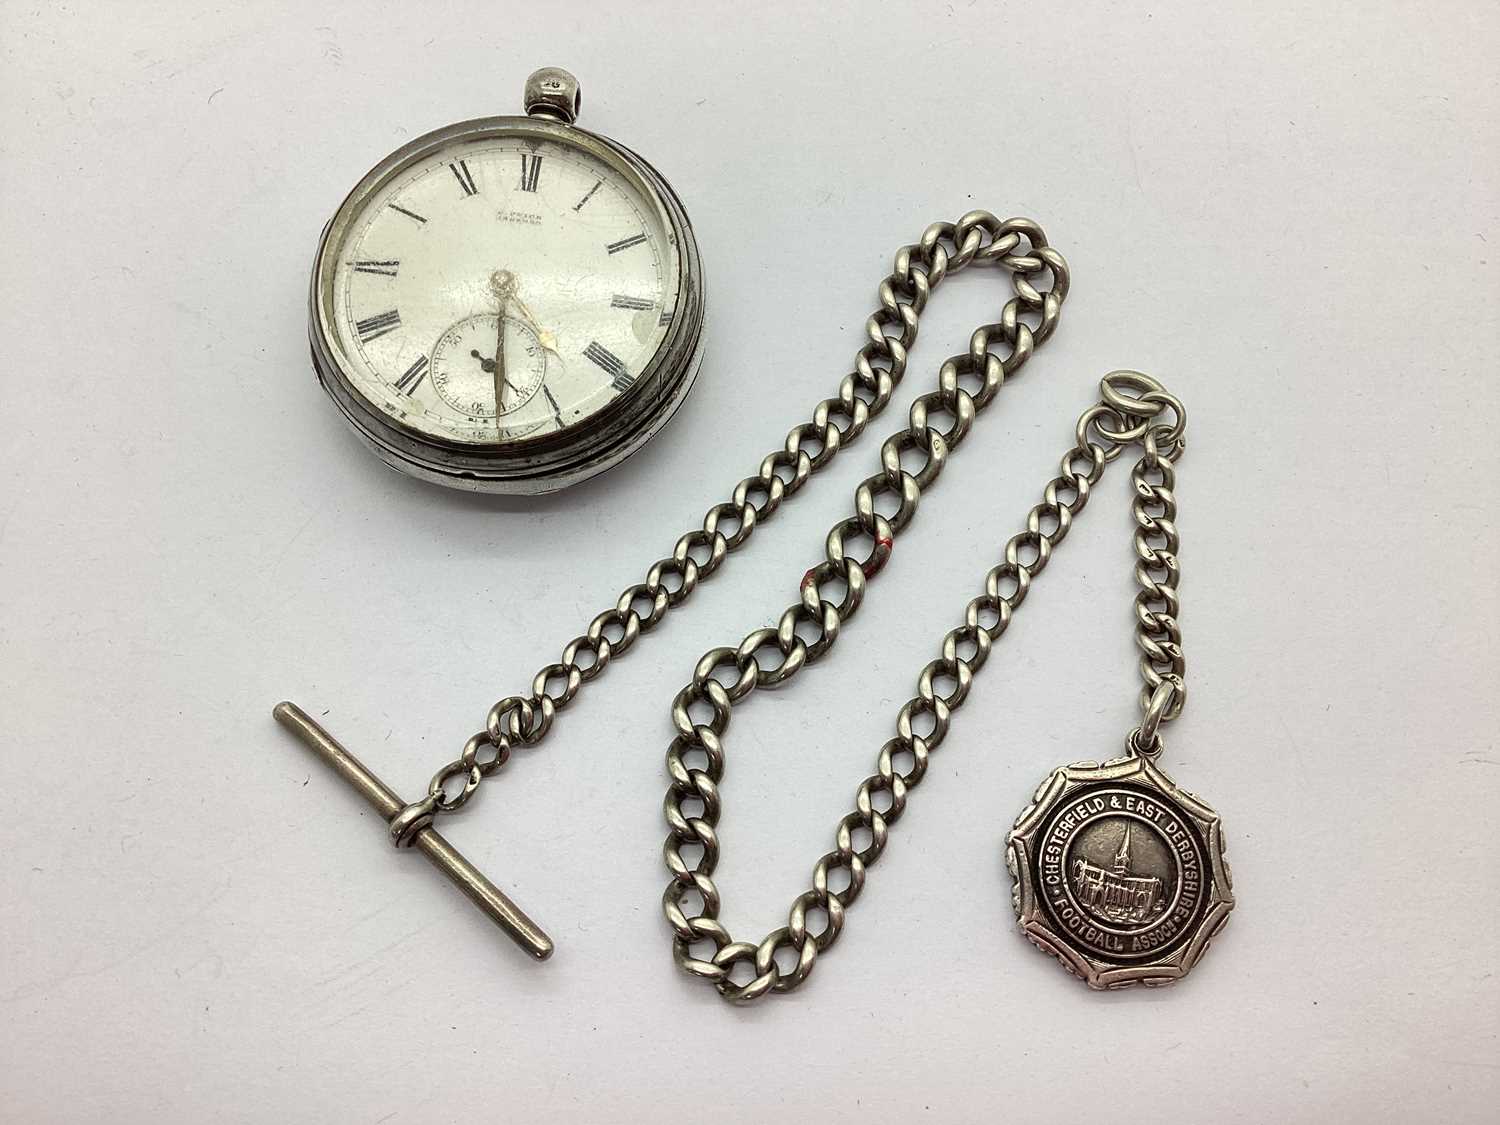 J. Price Ashford; A Hallmarked Silver Cased Openface Pocket Watch, the signed dial with black